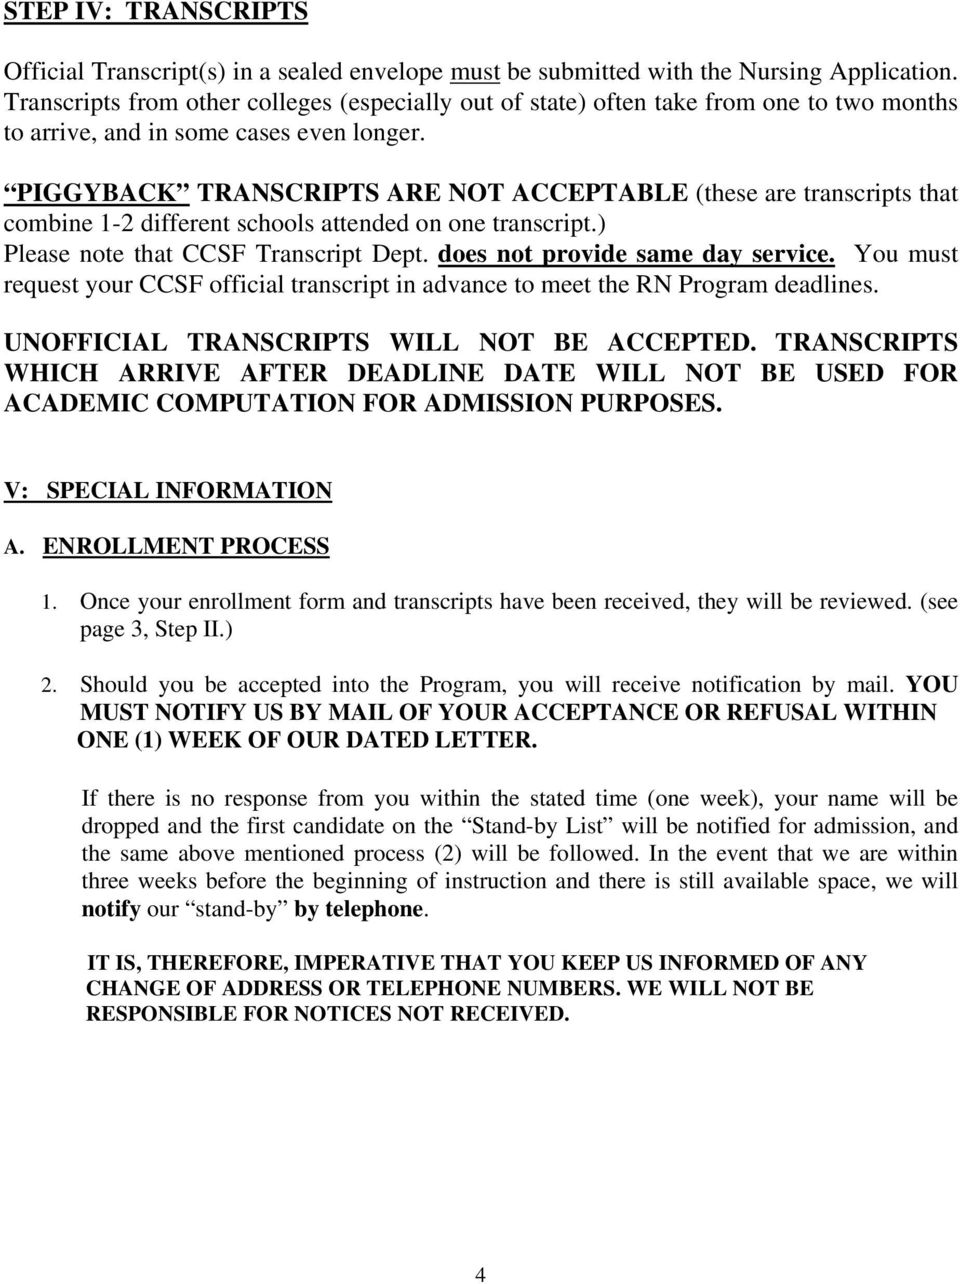 PIGGYBACK TRANSCRIPTS ARE NOT ACCEPTABLE (these are transcripts that combine 1-2 different schools attended on one transcript.) Please note that CCSF Transcript Dept.